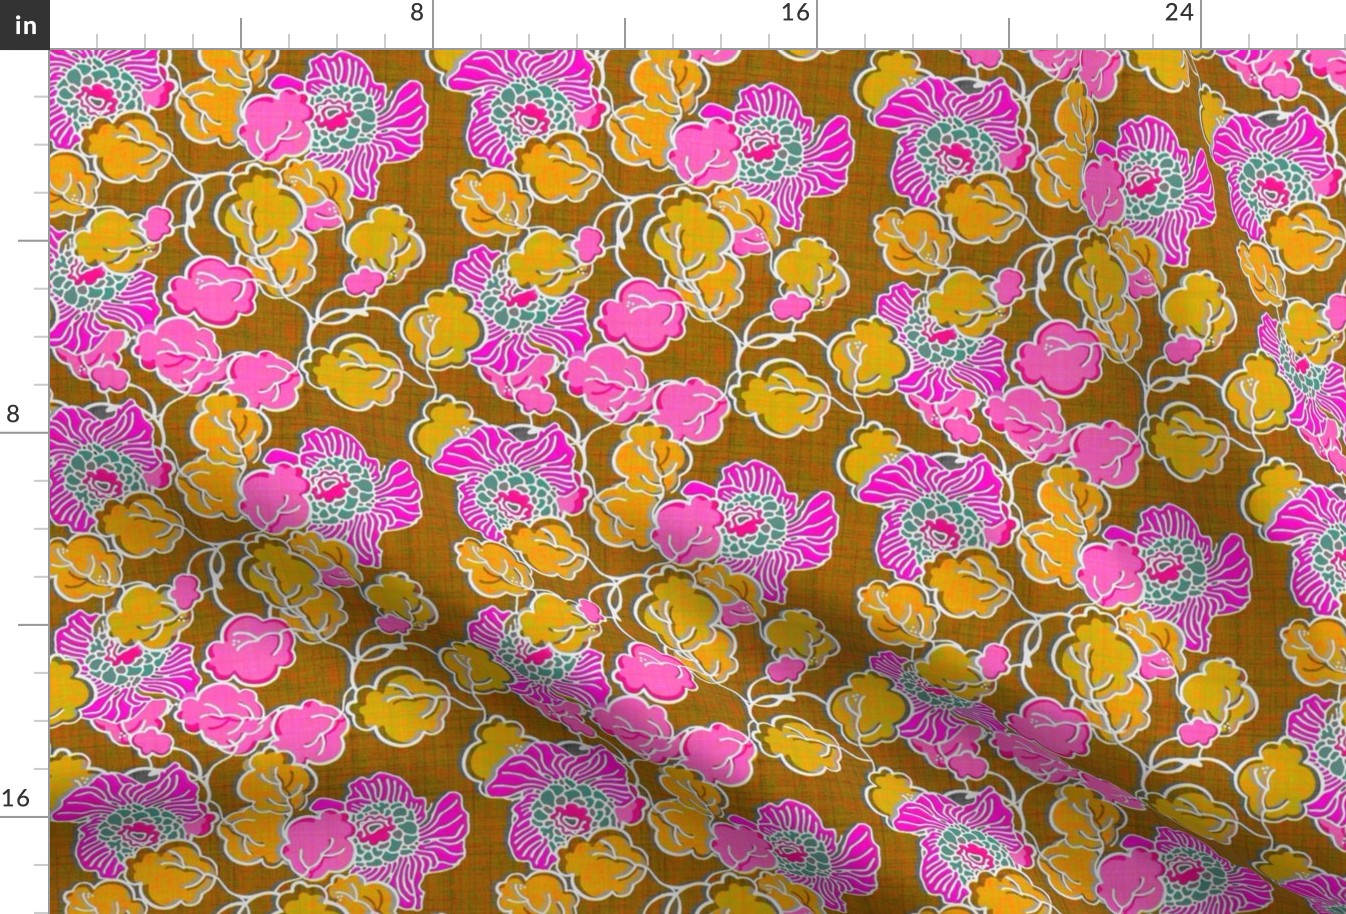 Hot pink and yellow floral